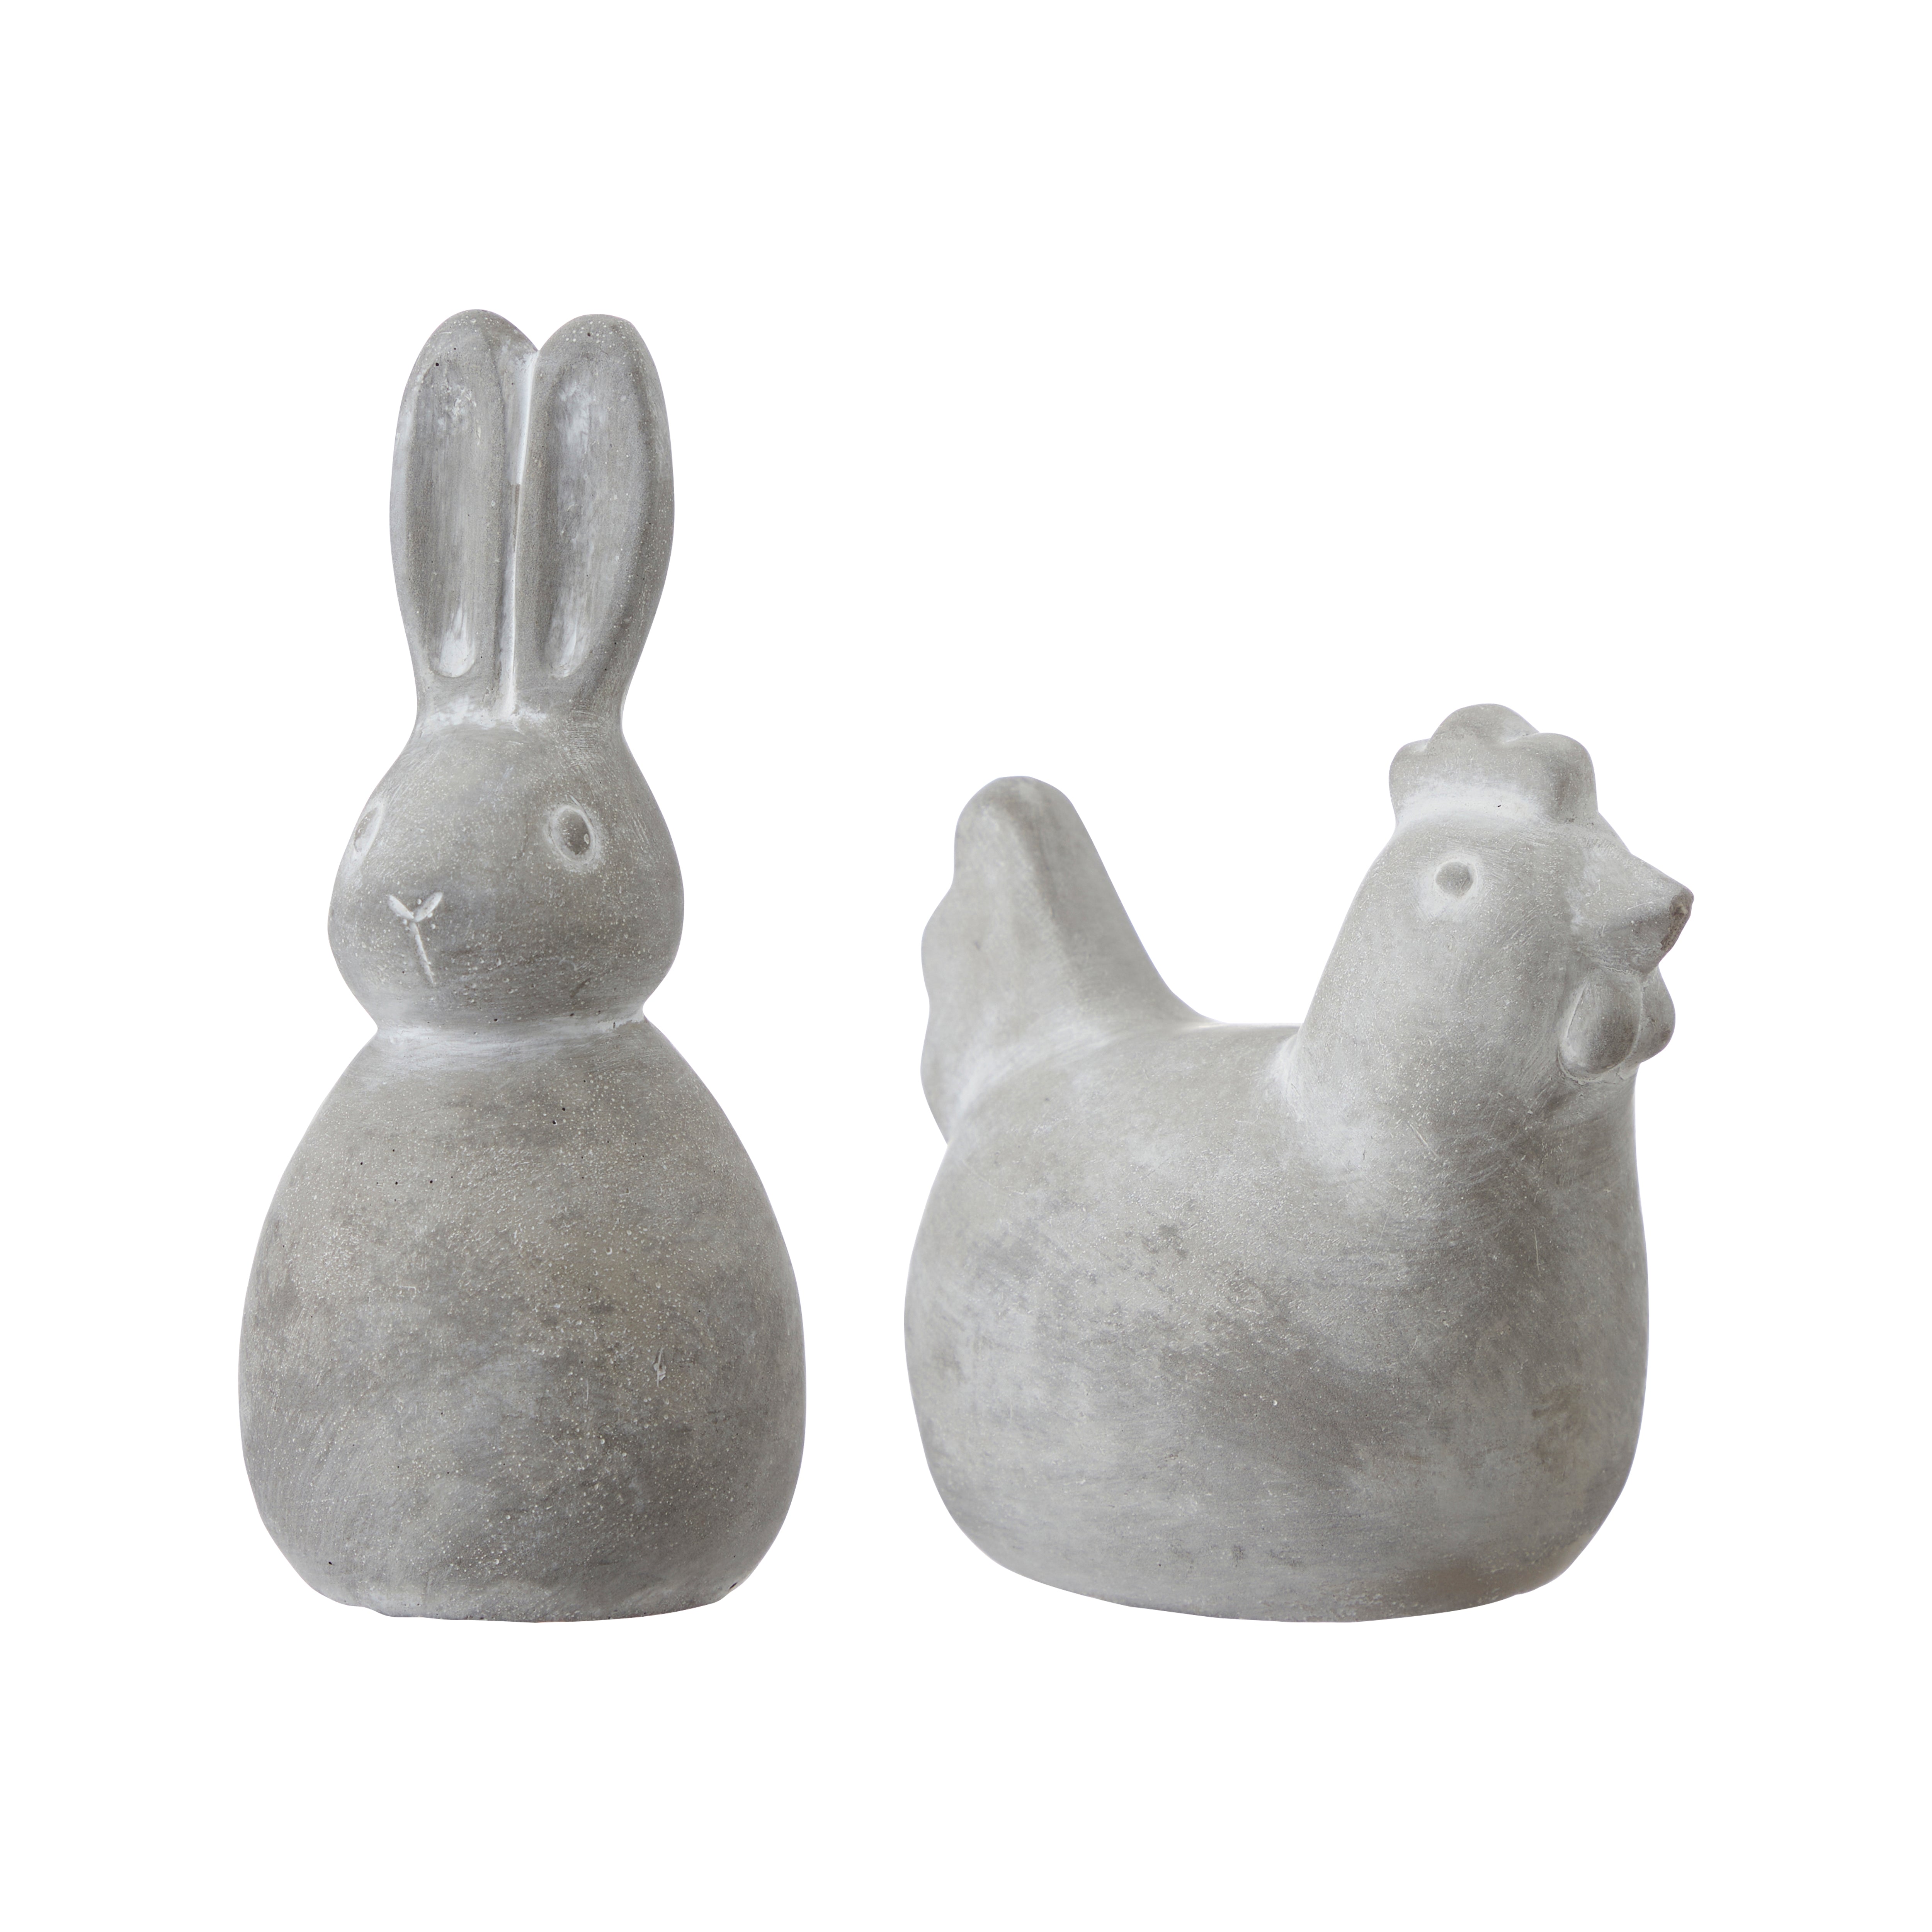 Bunny and Chick Decoration